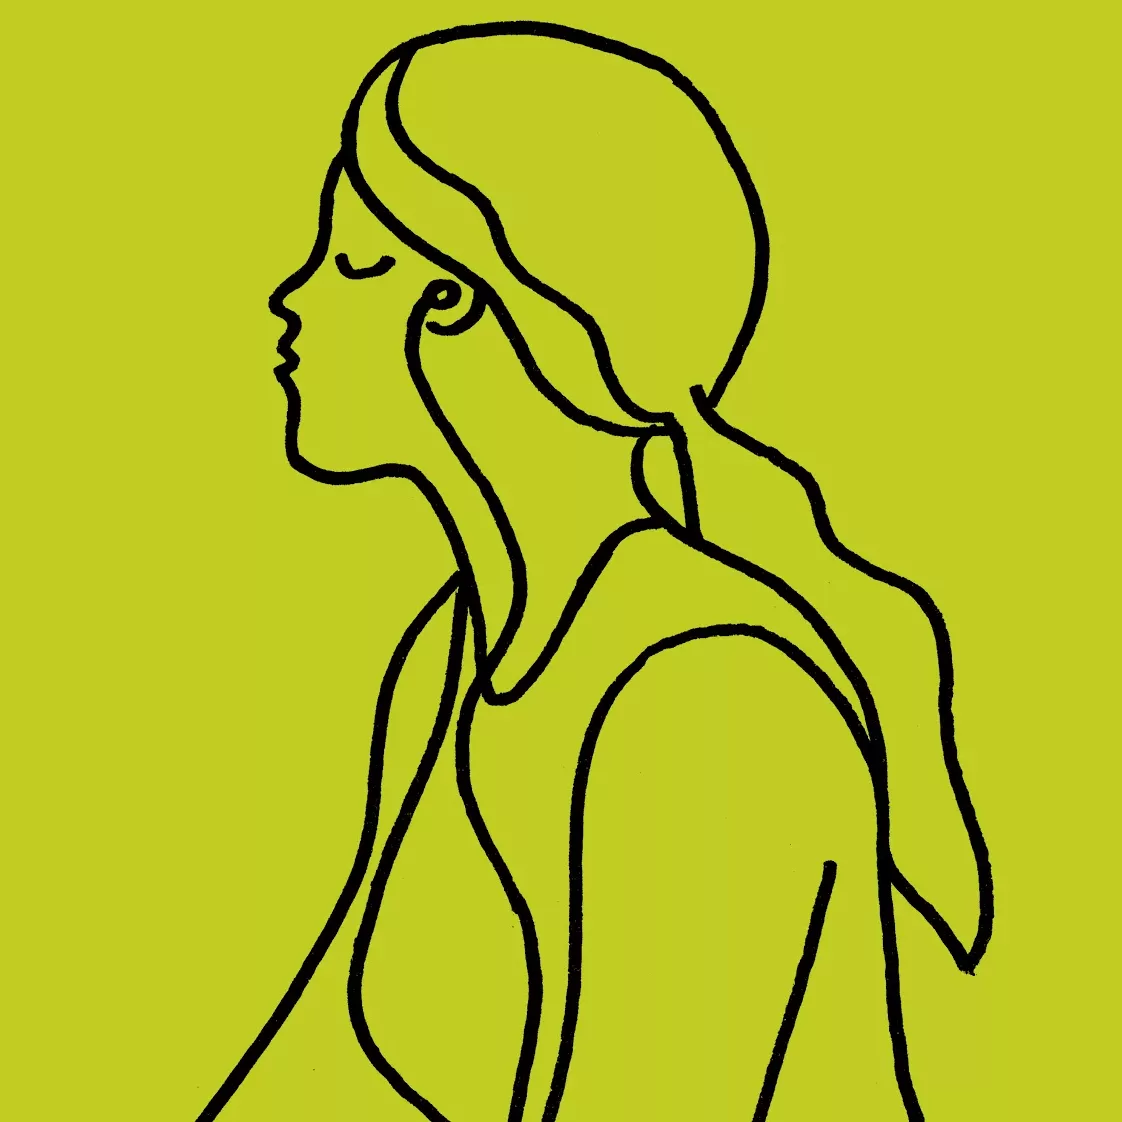 Line drawing of woman listening to audio.